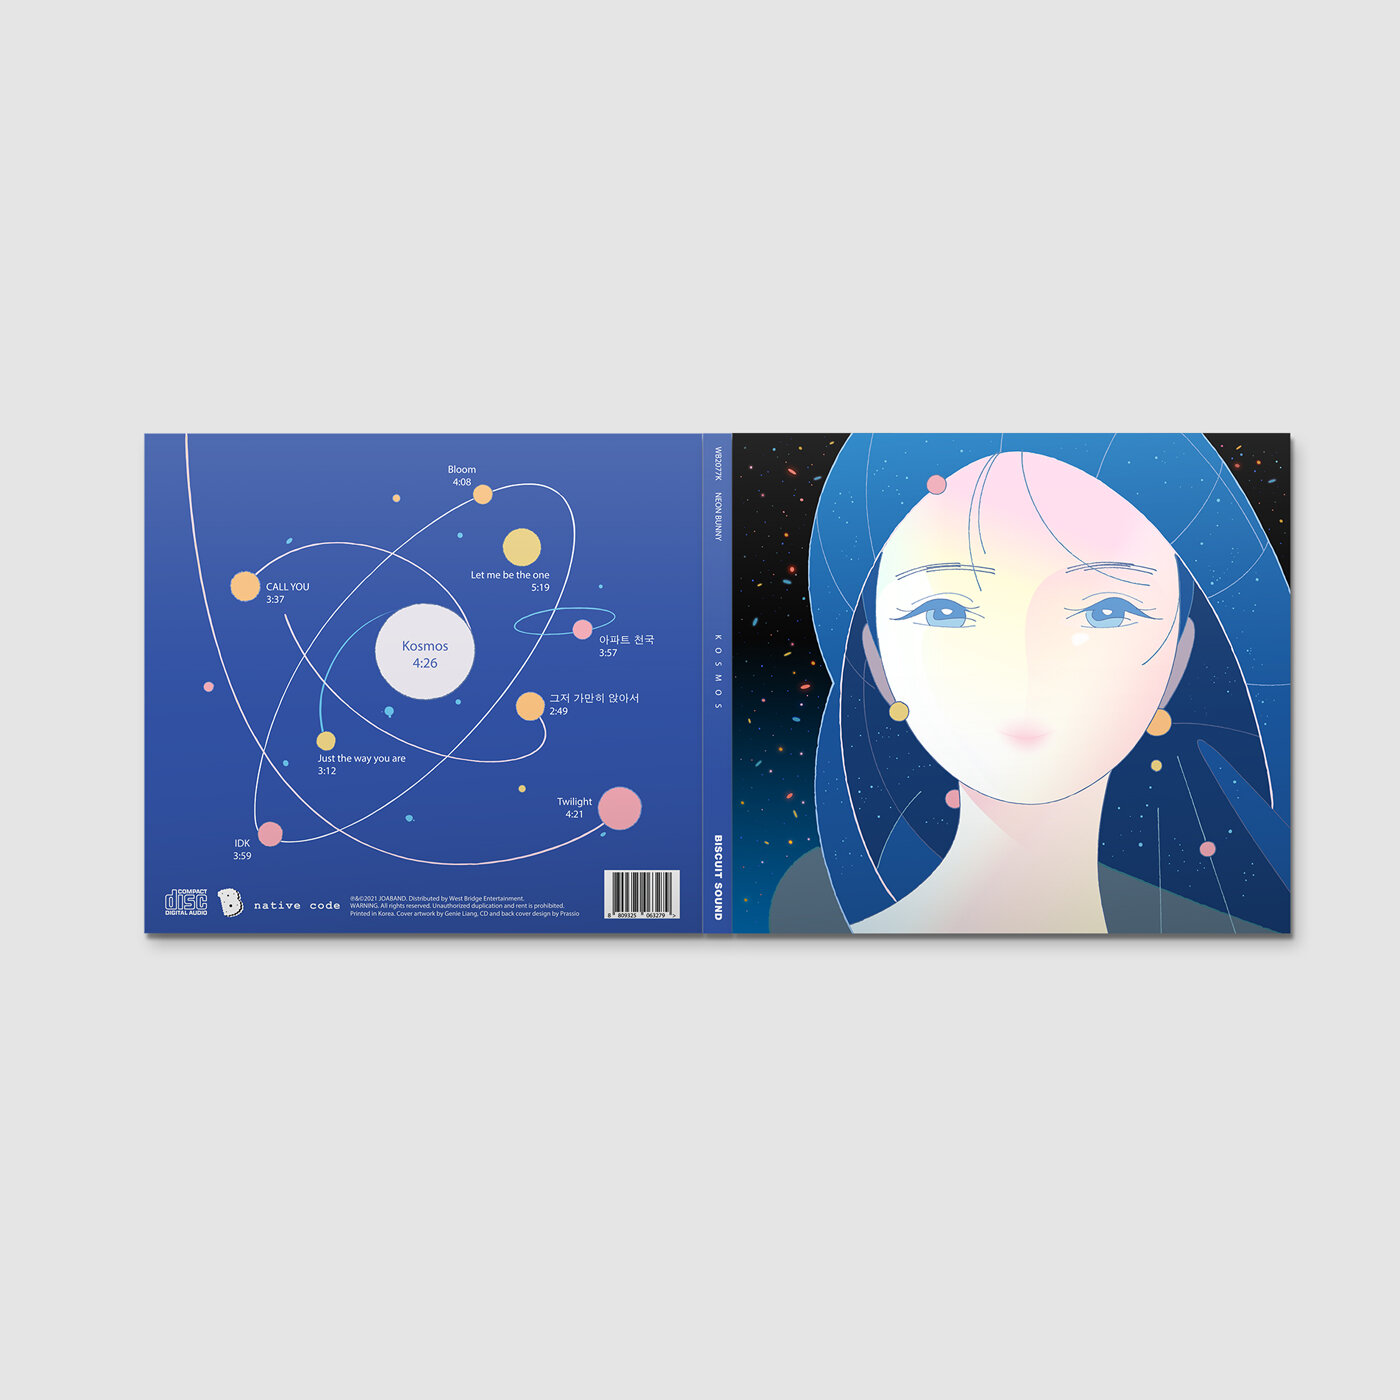 GN_CO_IL_kosmos-CD-packaging_outside.jpg